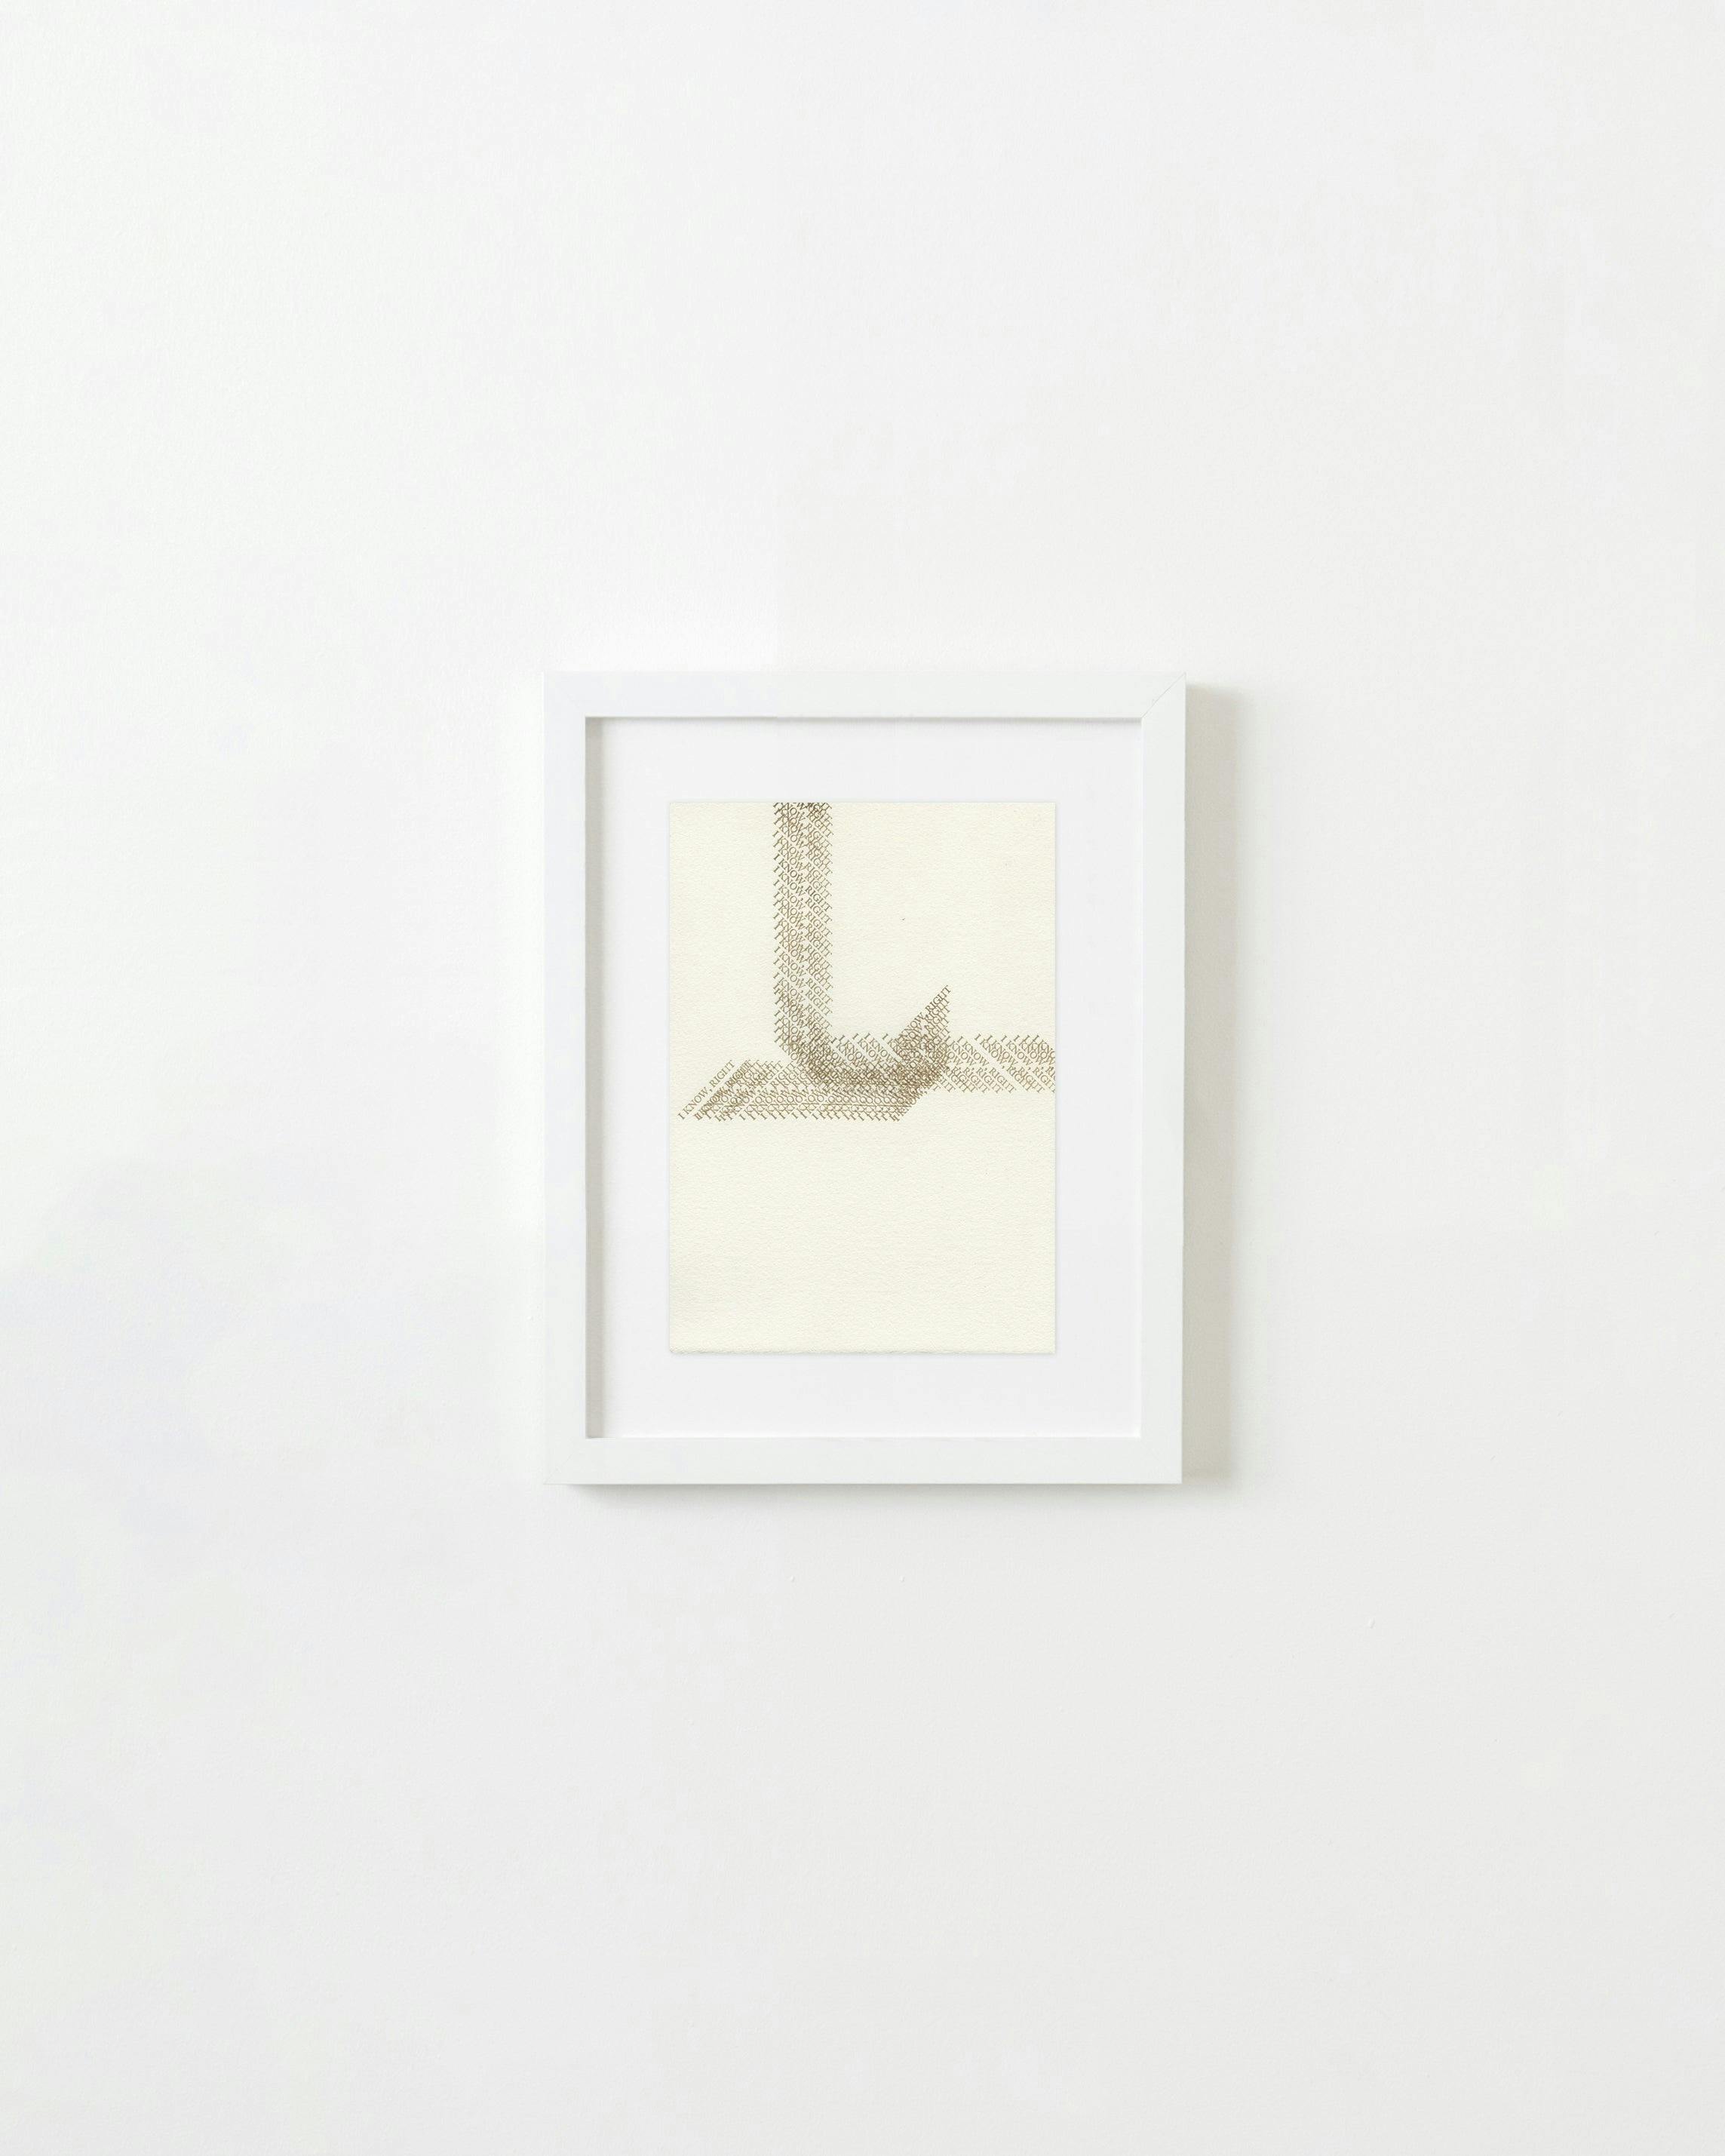 Print by Alyson Provax titled "Untitled (I know, right)".